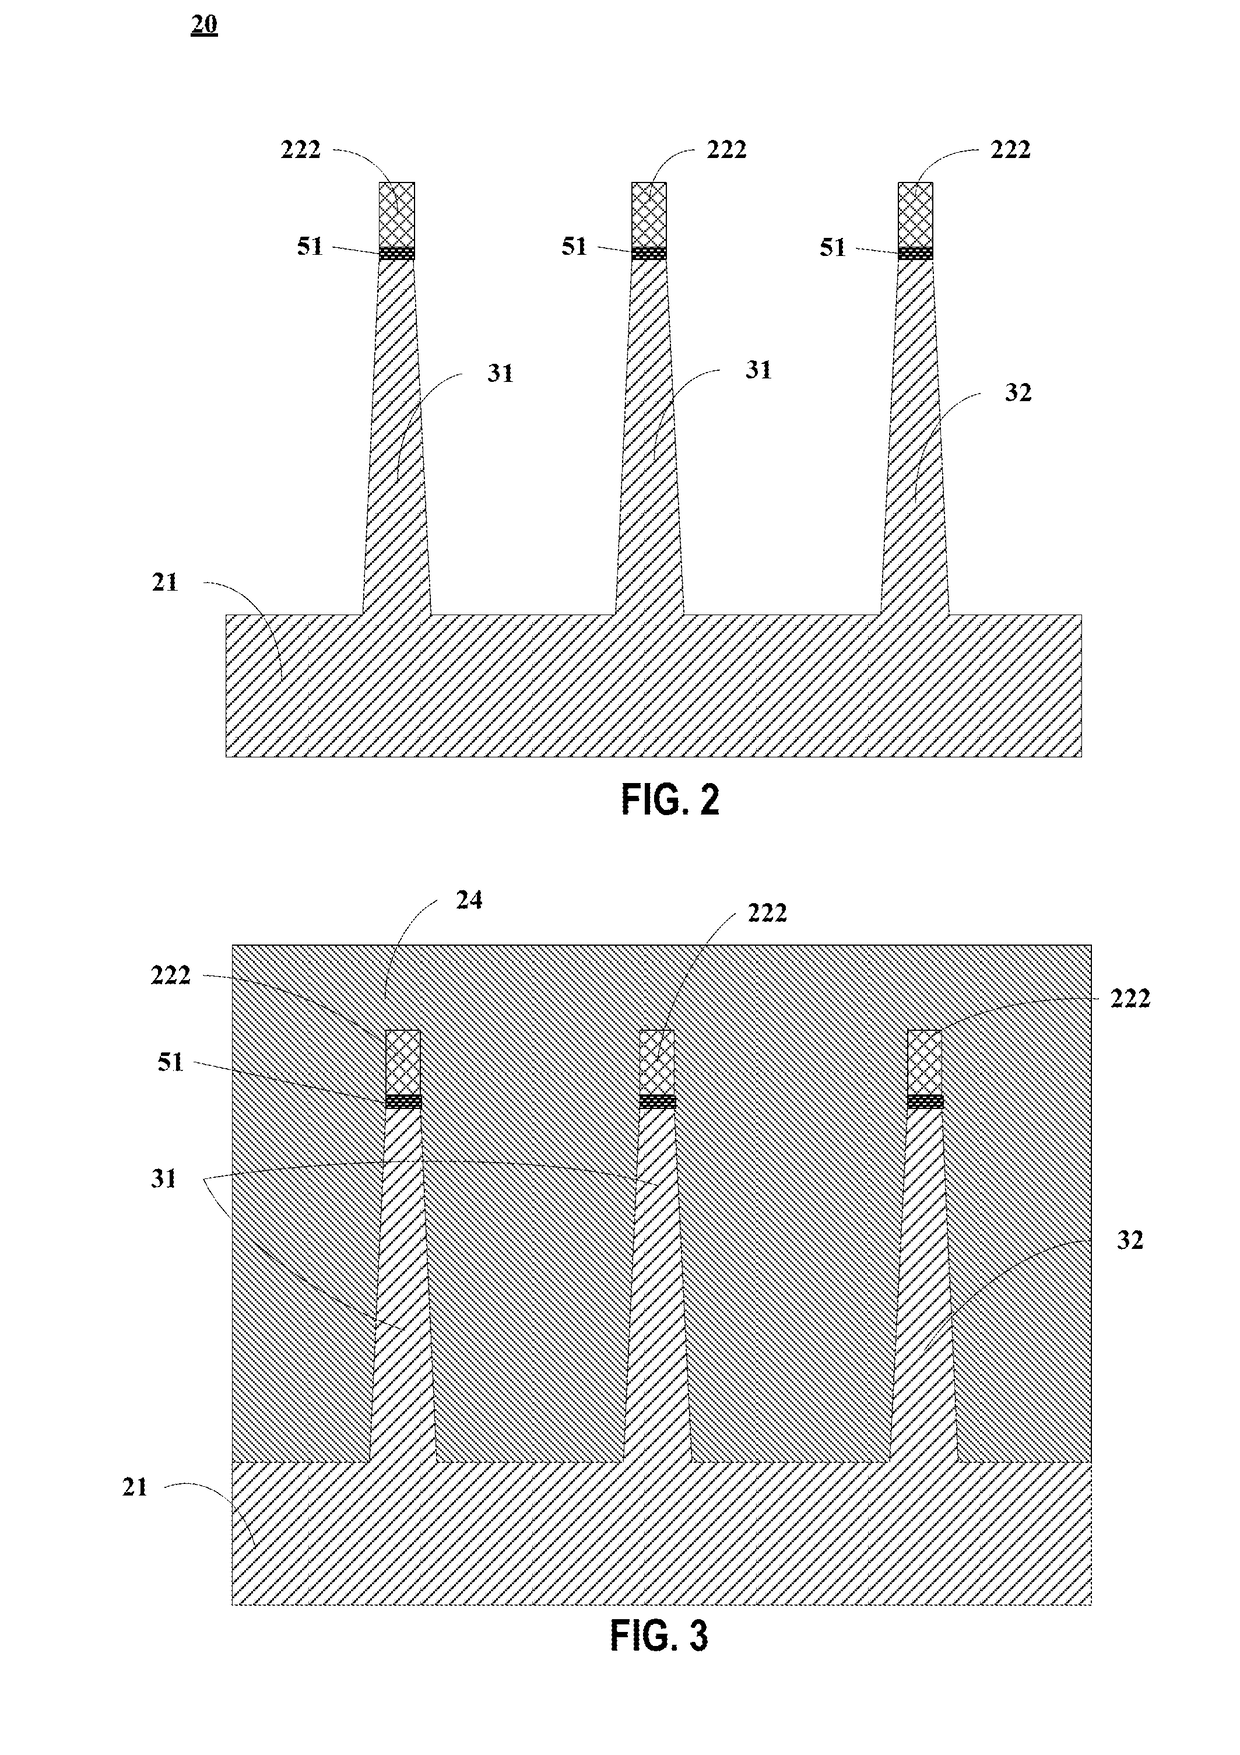 Finfet with improved gate dielectric